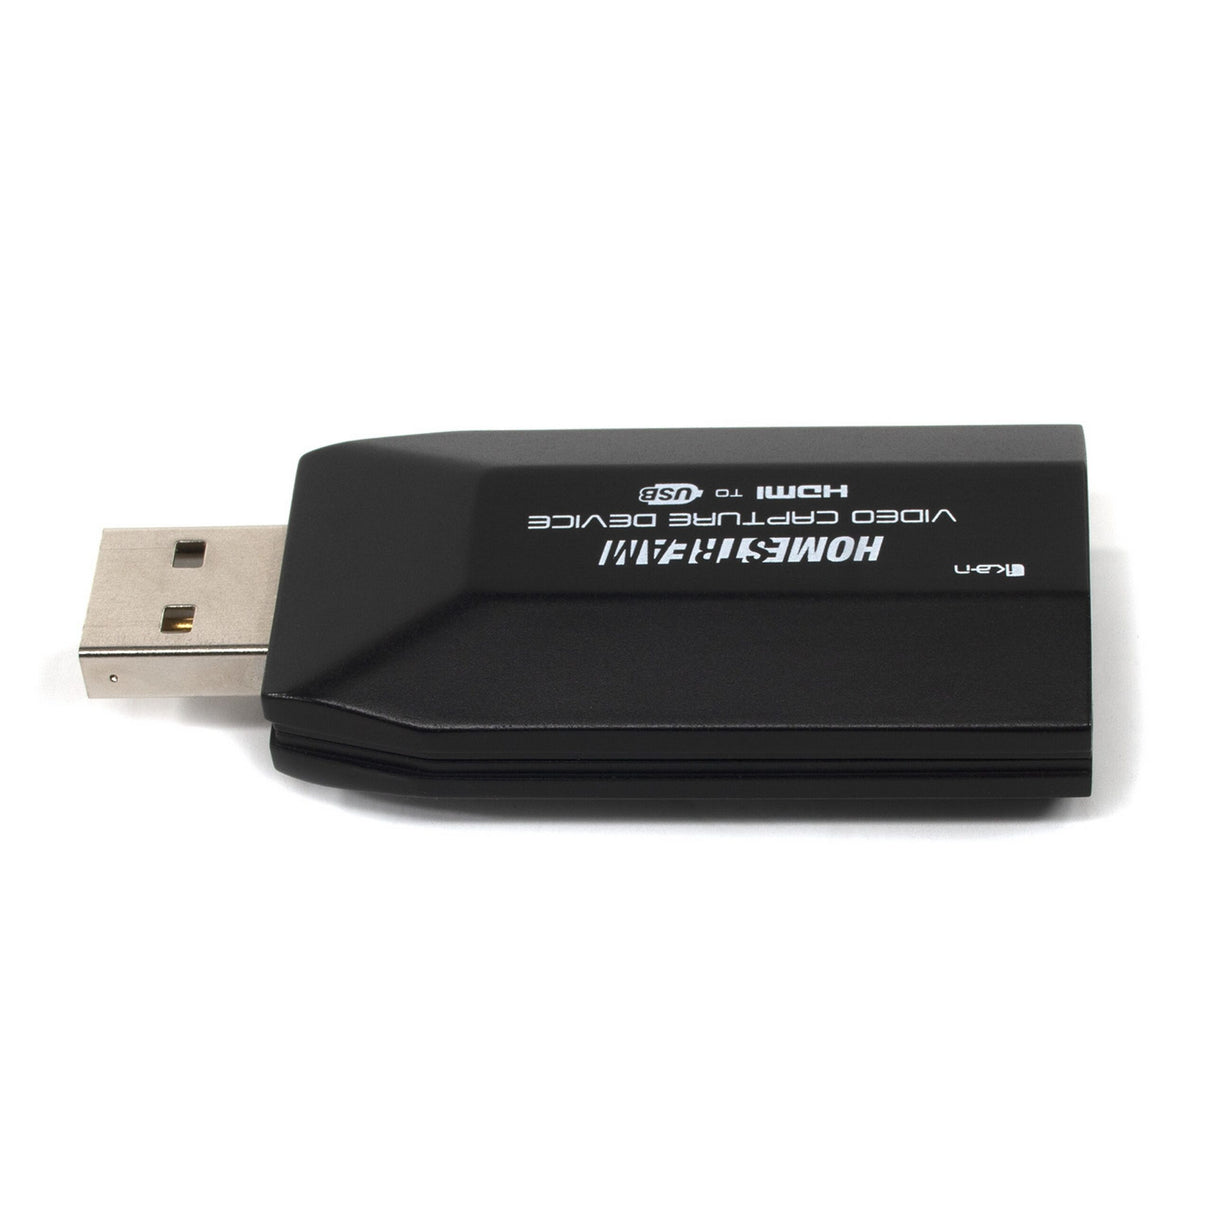 Ikan HS-VCD-2 4K HomeStream HDMI to USB Video Capture Device